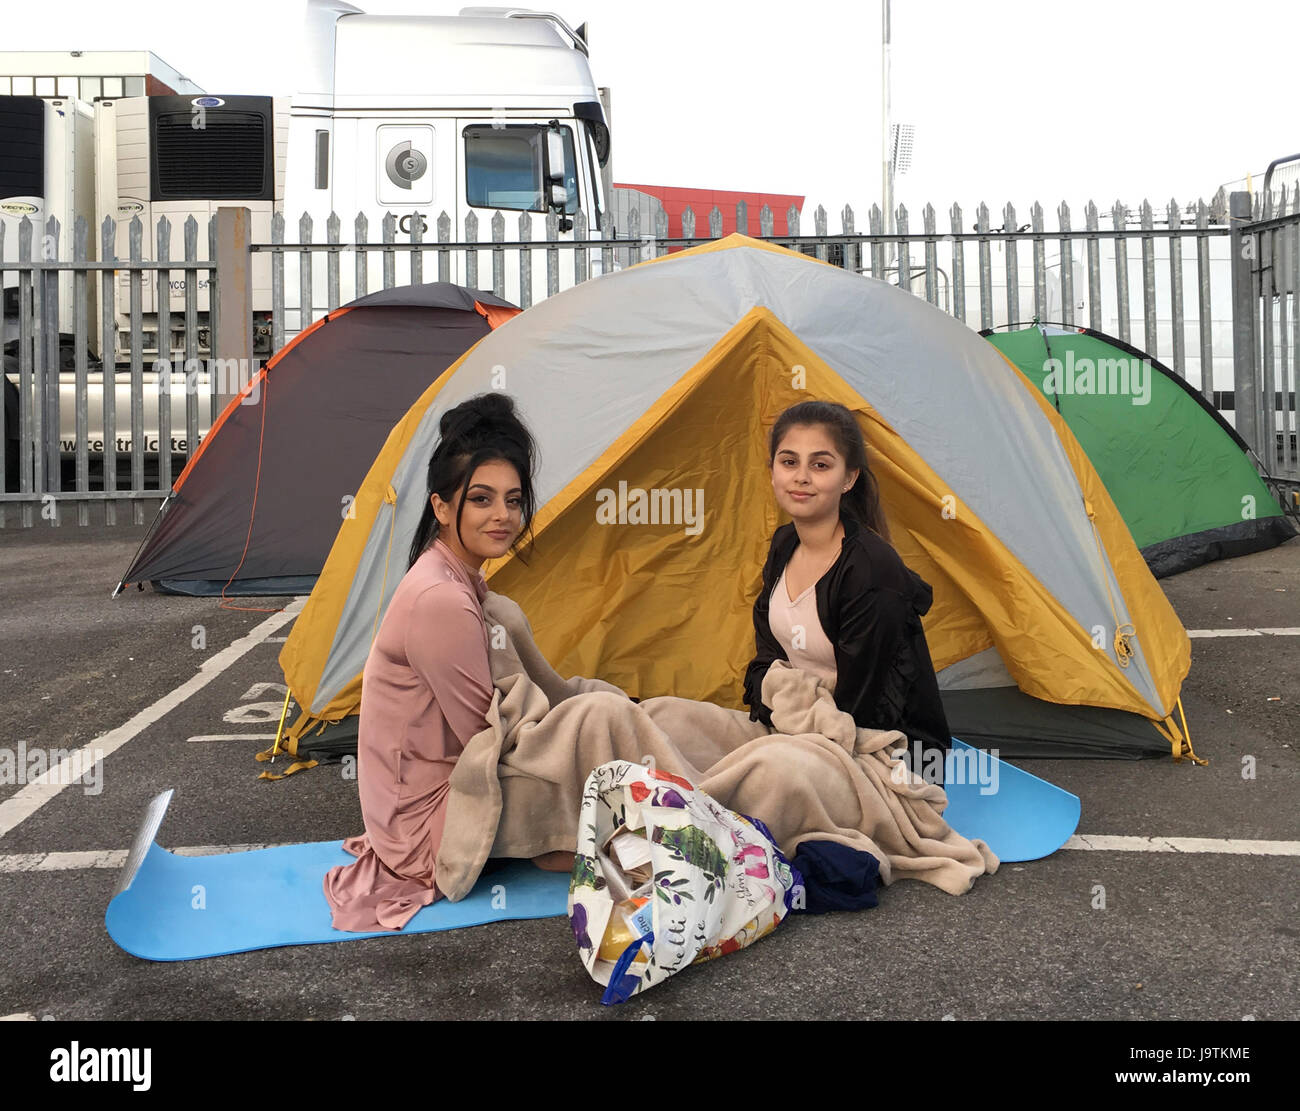 Manchester, UK. 3rd June, 2017. sisters l-r Yasmin Ishaq (aged 19) and Nadiq Ishaq aged 18 are first in the queue for tomorrows One love concert at the Emirates Old Trafford stadium. Both sisters survived the bombing at the Ariana Grande concert on 22nd May 2017 in Manchester. They escaped via the fire escape. They face a long night as they arrived without a tent( tents in background belong to other people in queue. Credit: GARY ROBERTS/Alamy Live News Stock Photo